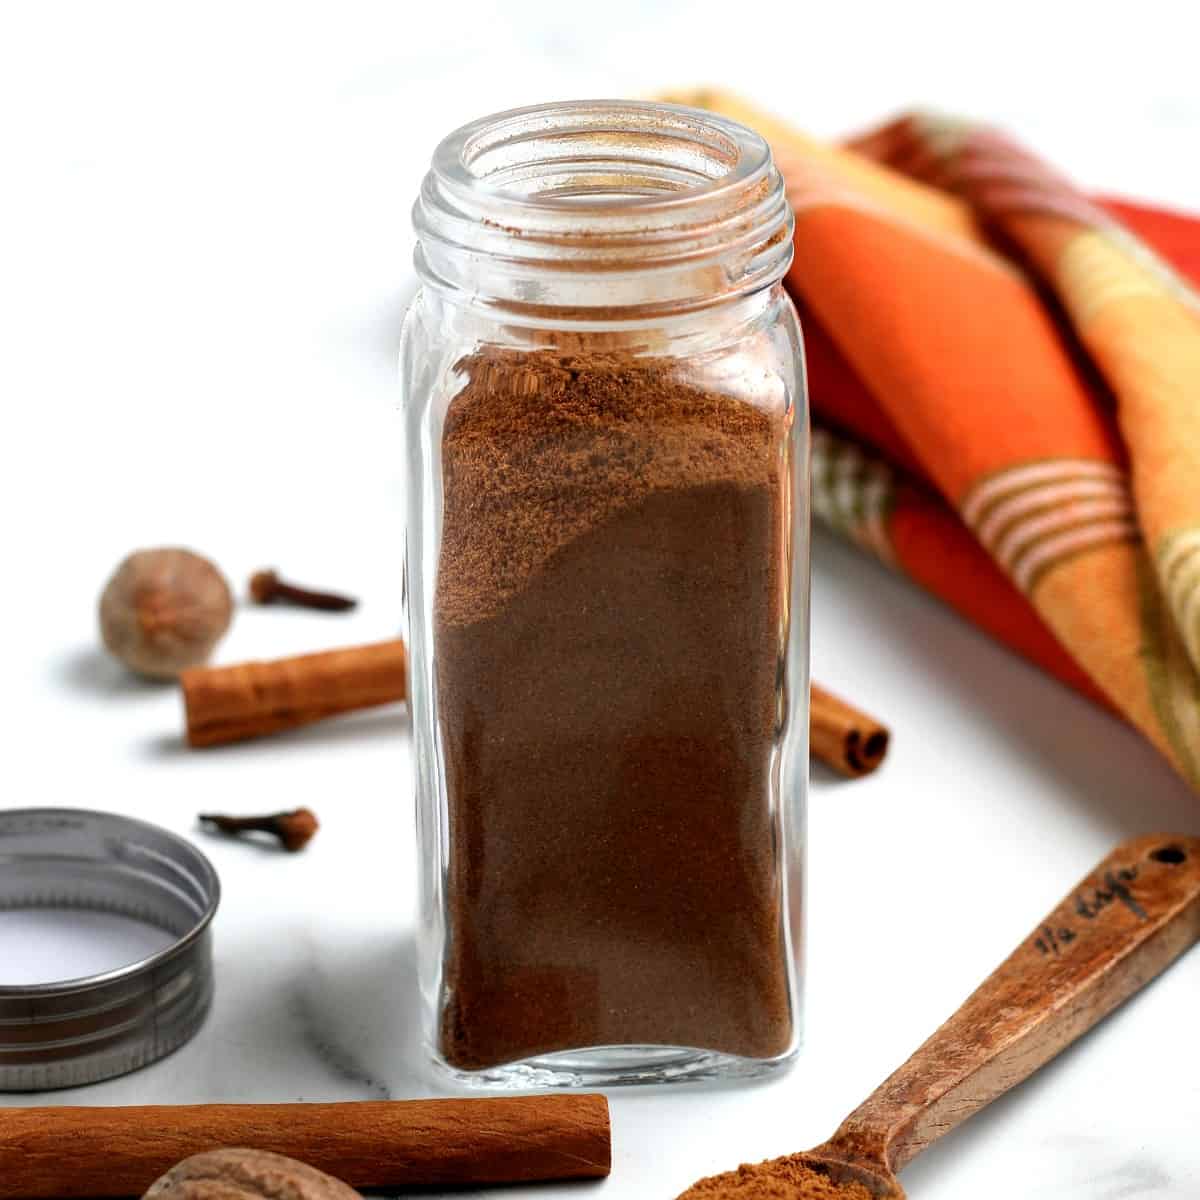 Tall spice jar is full with spices and measuring spoon scattered around.